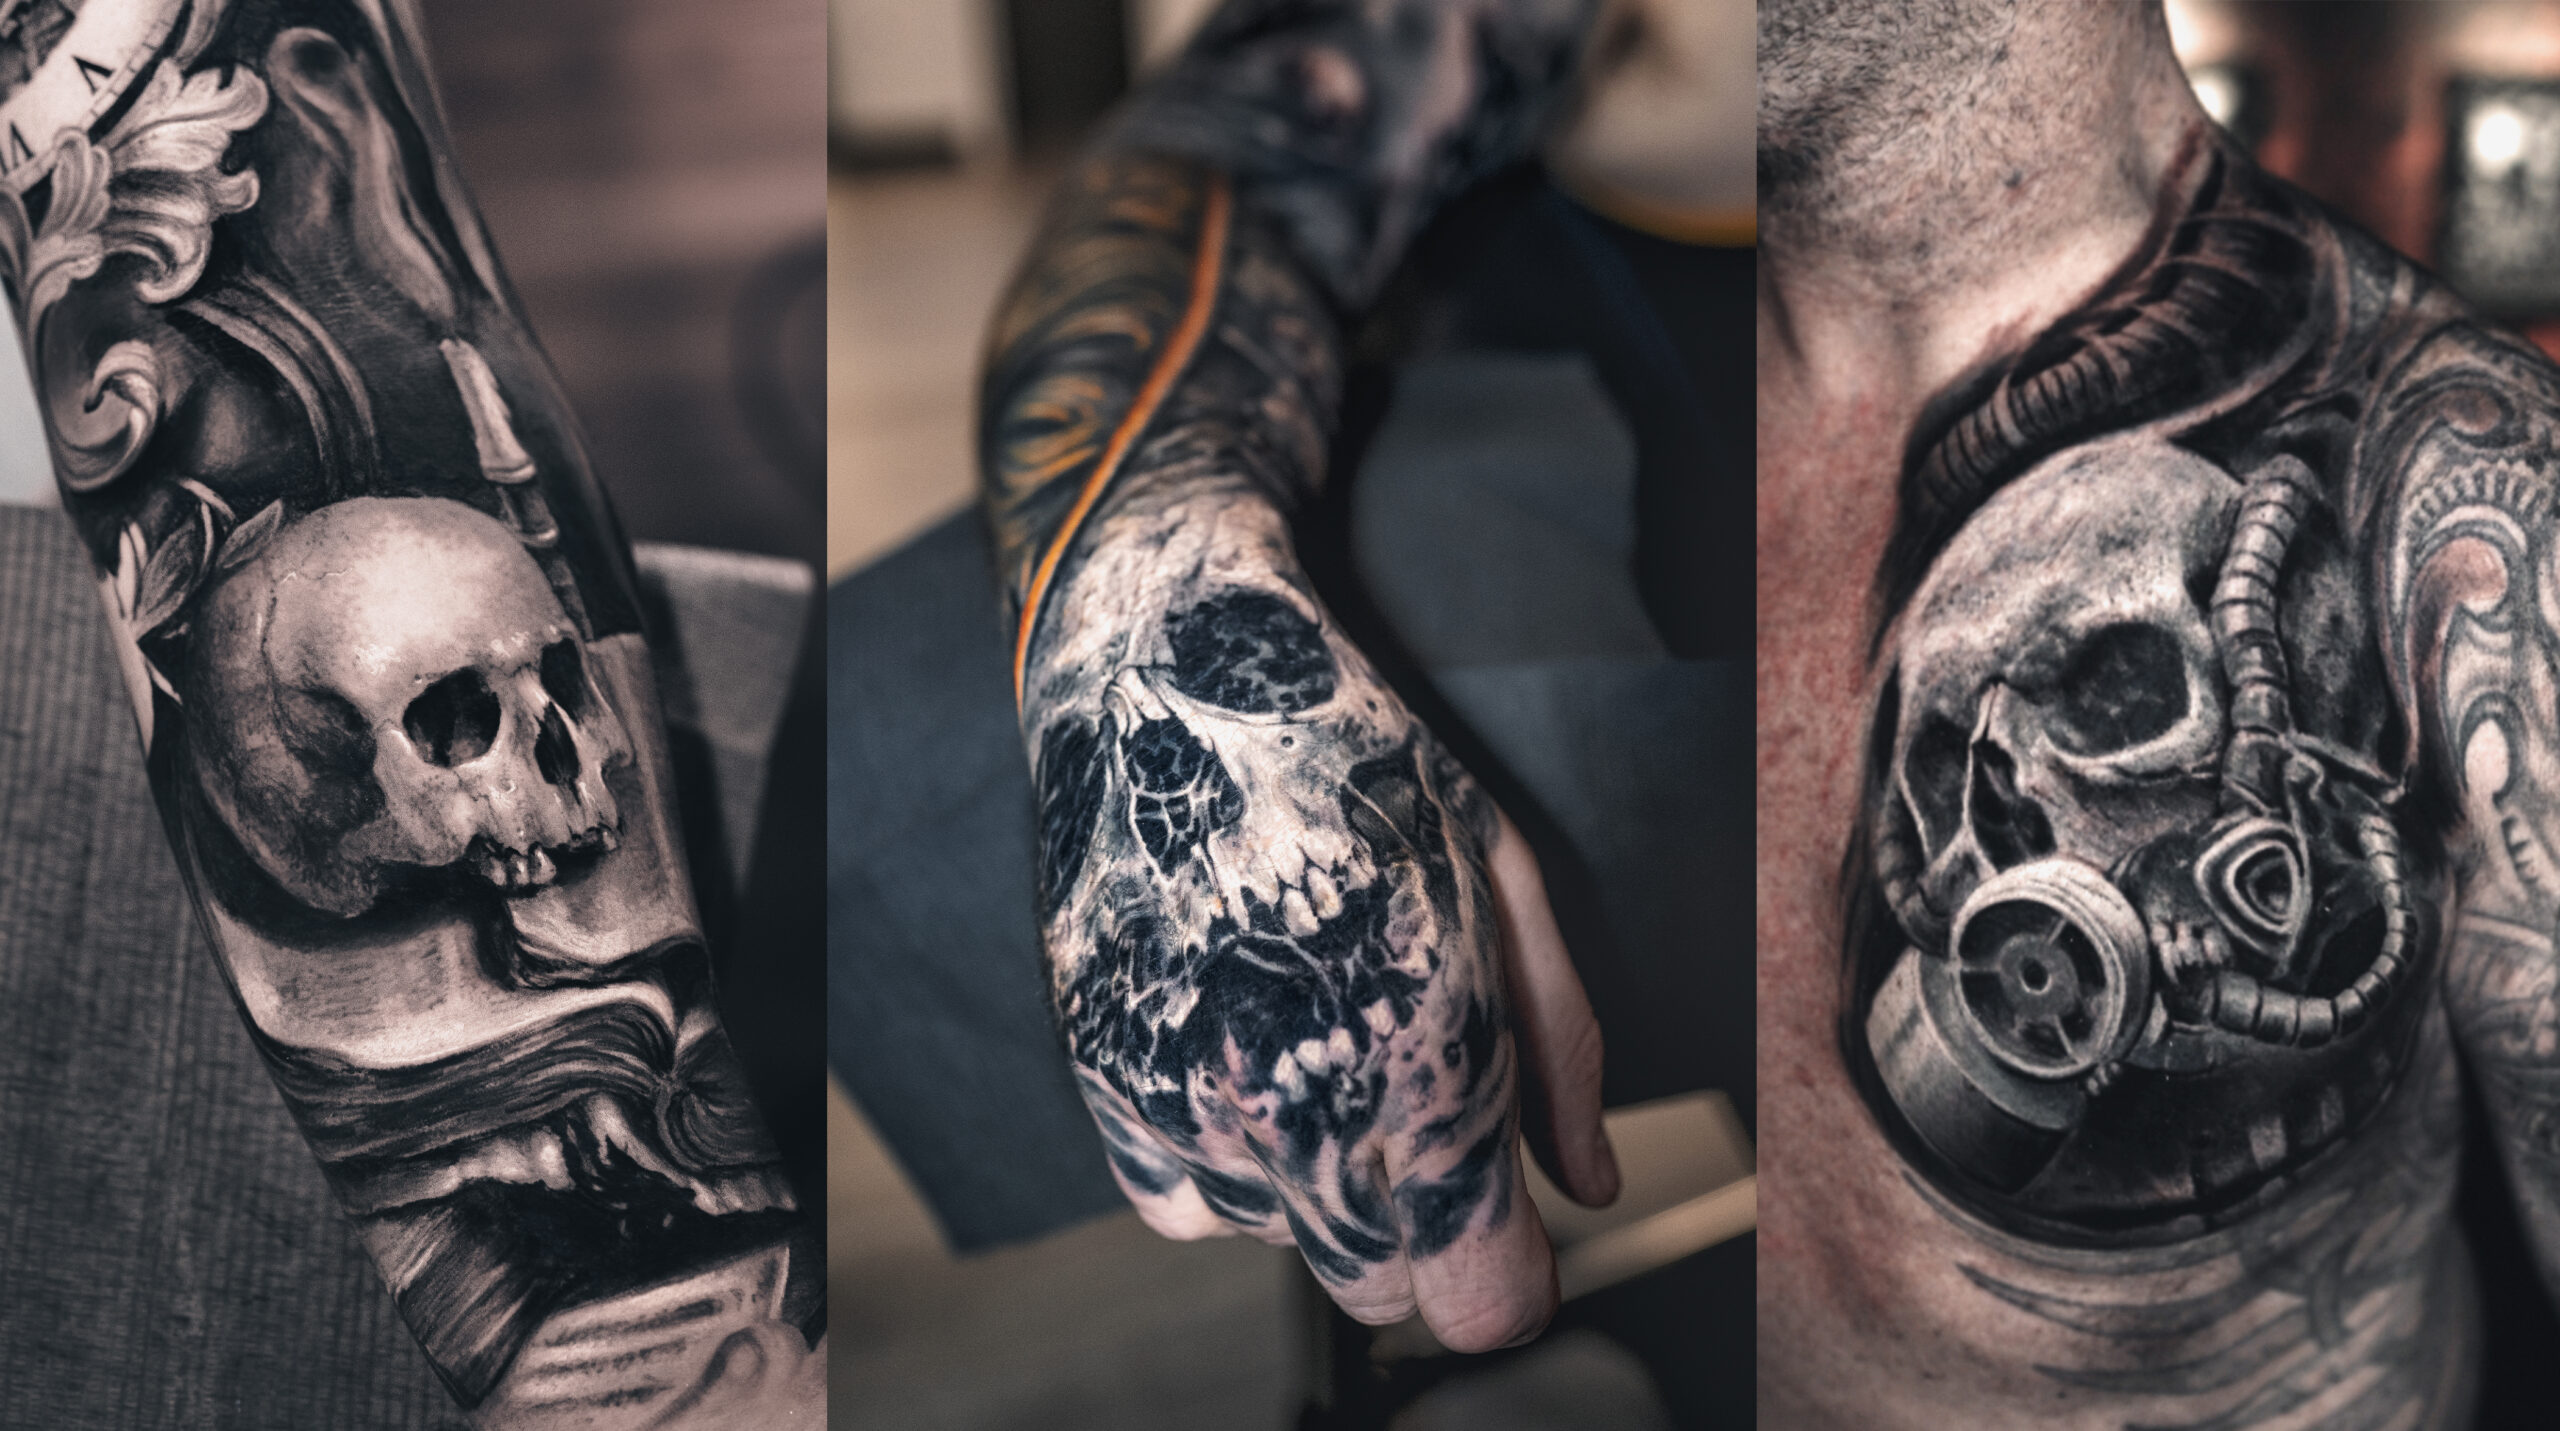 Skull Tattoo Meaning and Designs - Best Tattoo Shop In NYC